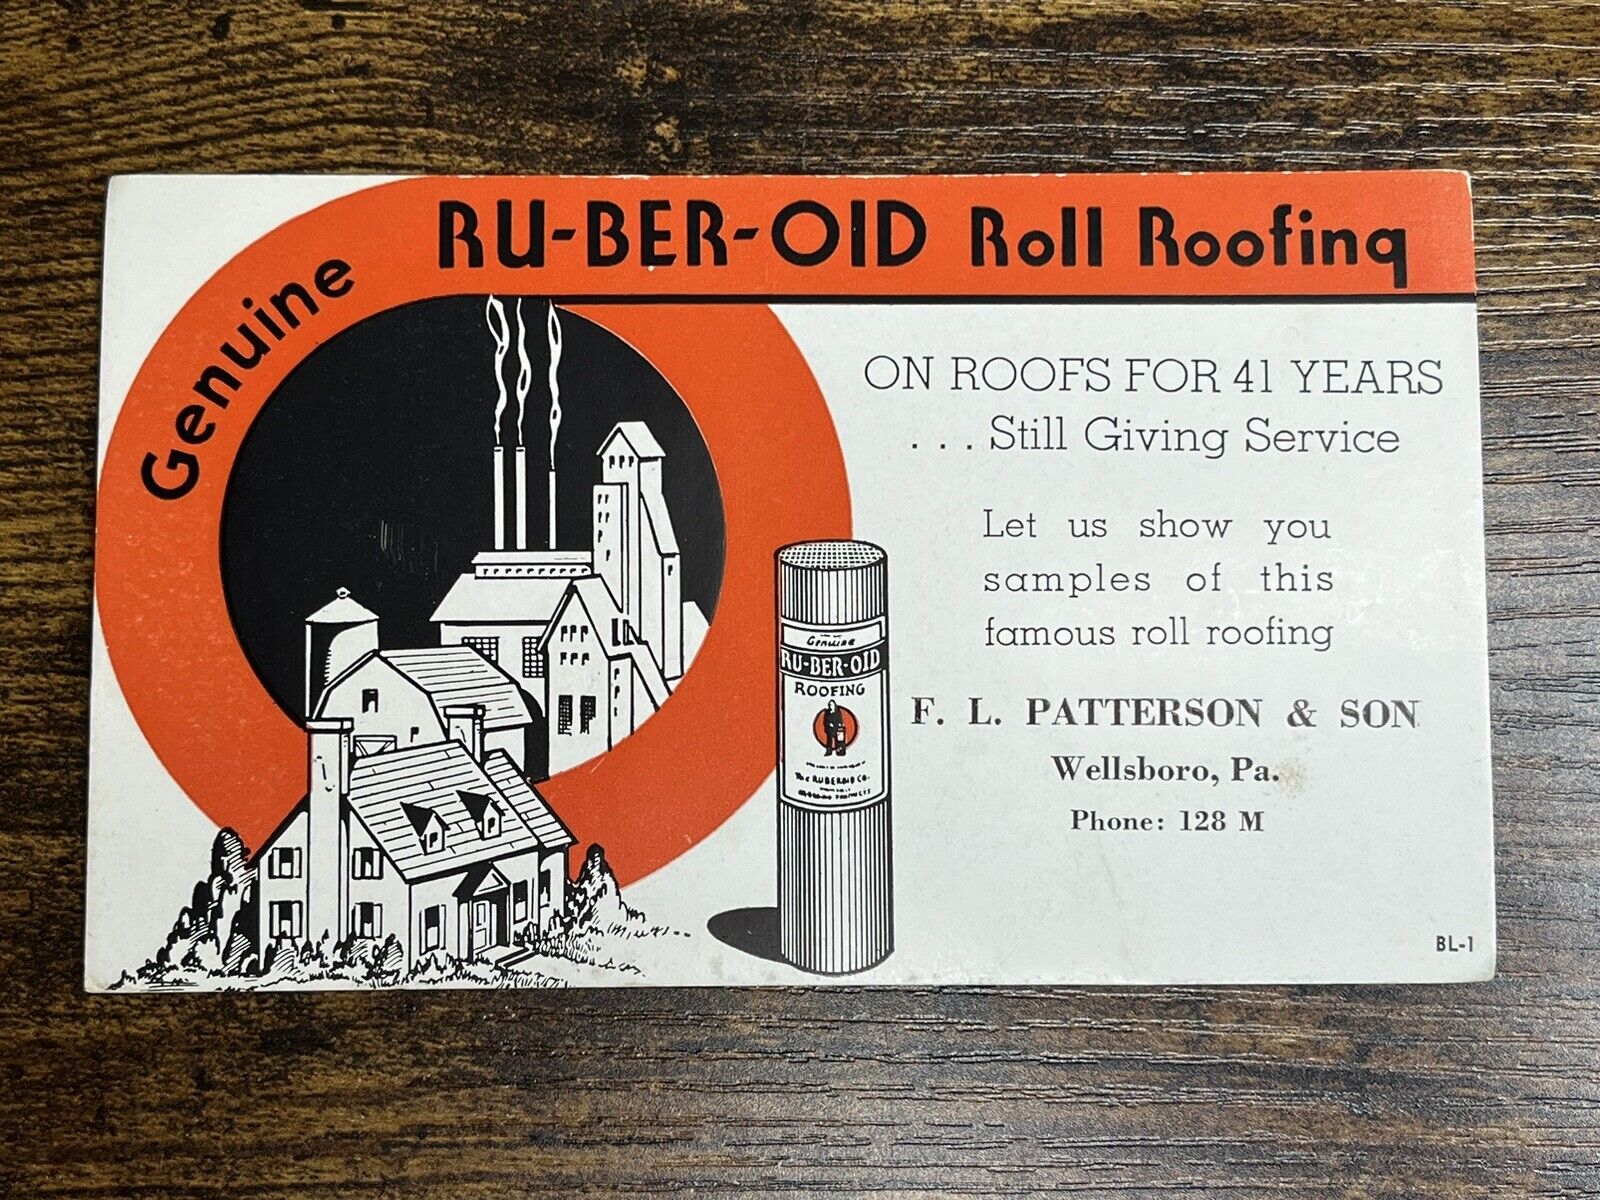 Ad Card: Ru-ber-oid Roll Roofing Patterson & Son Wellsboro PA Post Card Trade